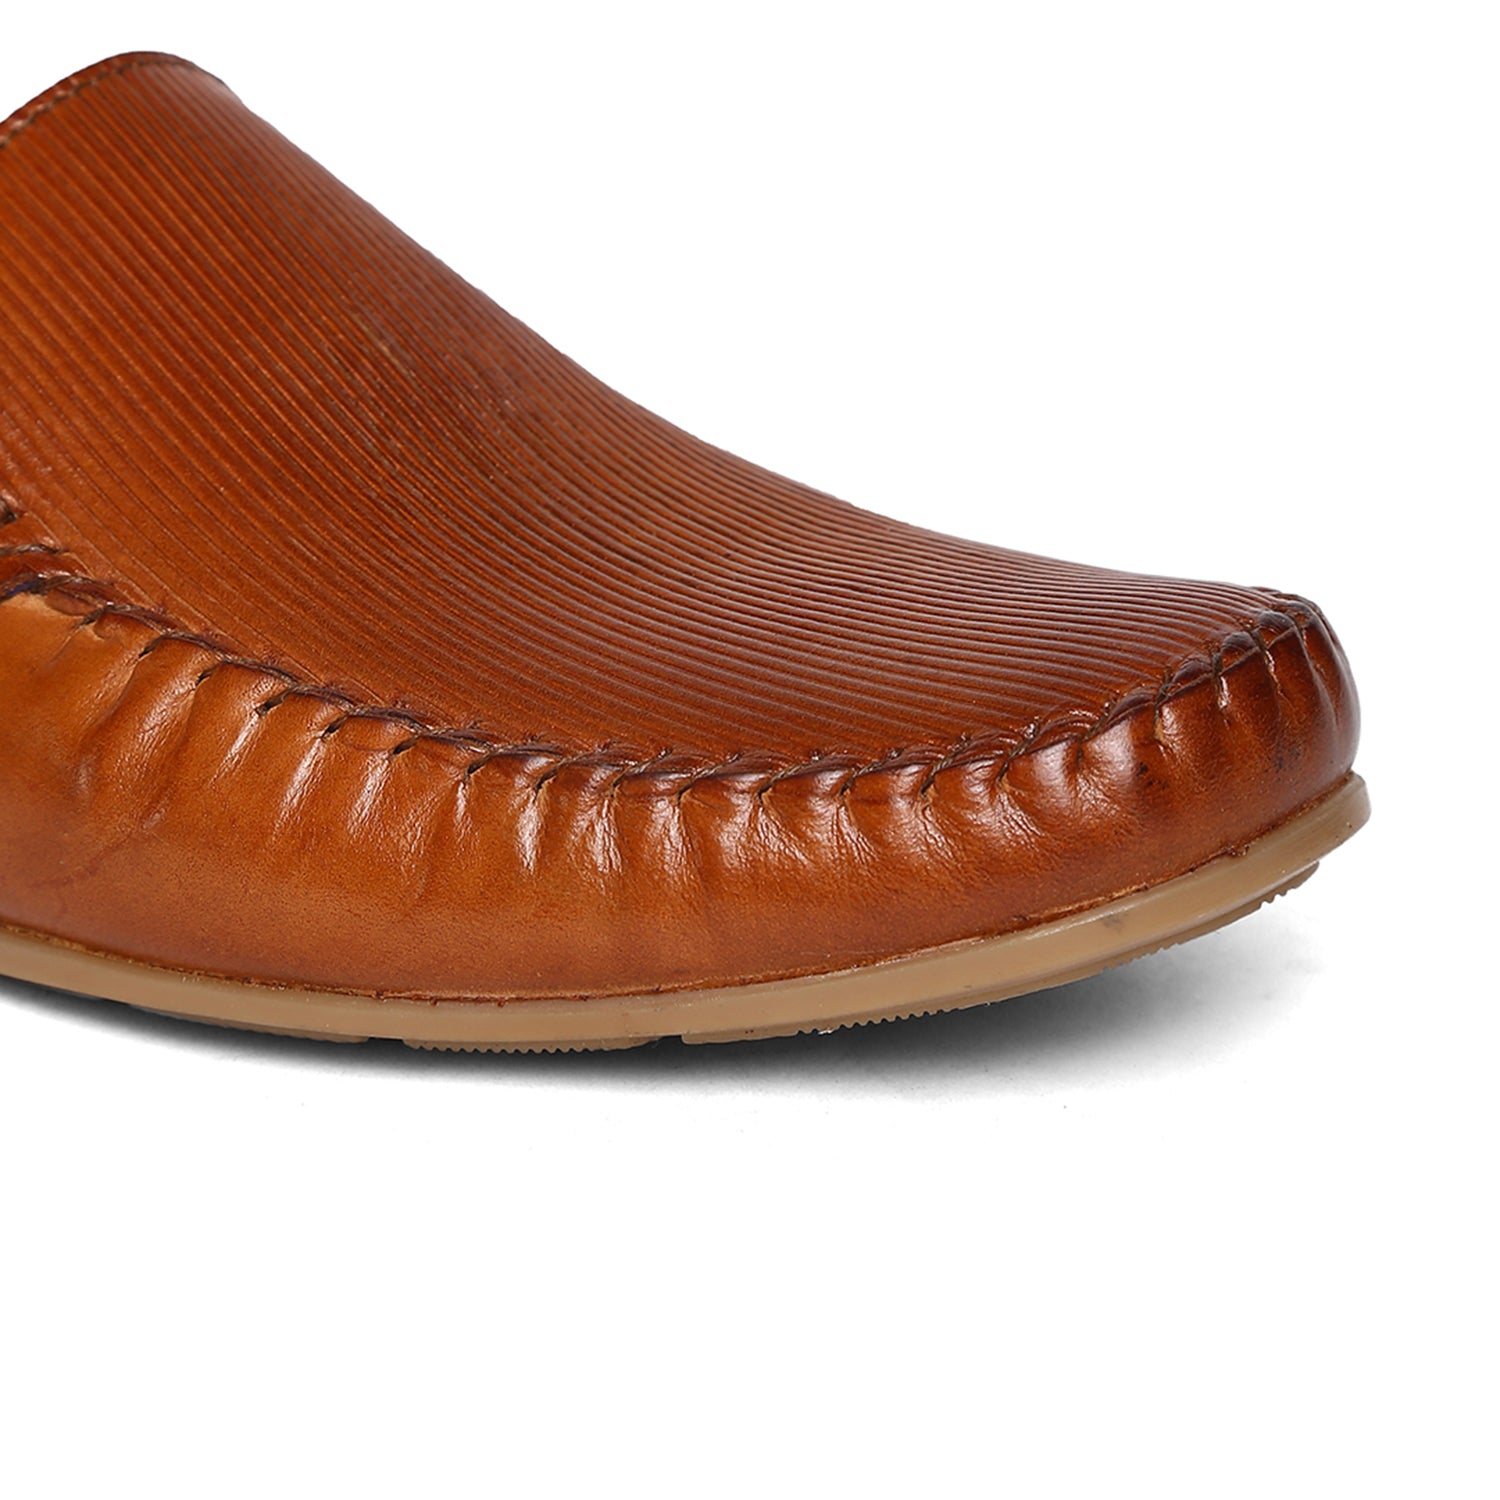 Masabih Genuine Leather Tan Mocassin Shoes with Flat Sole for Men